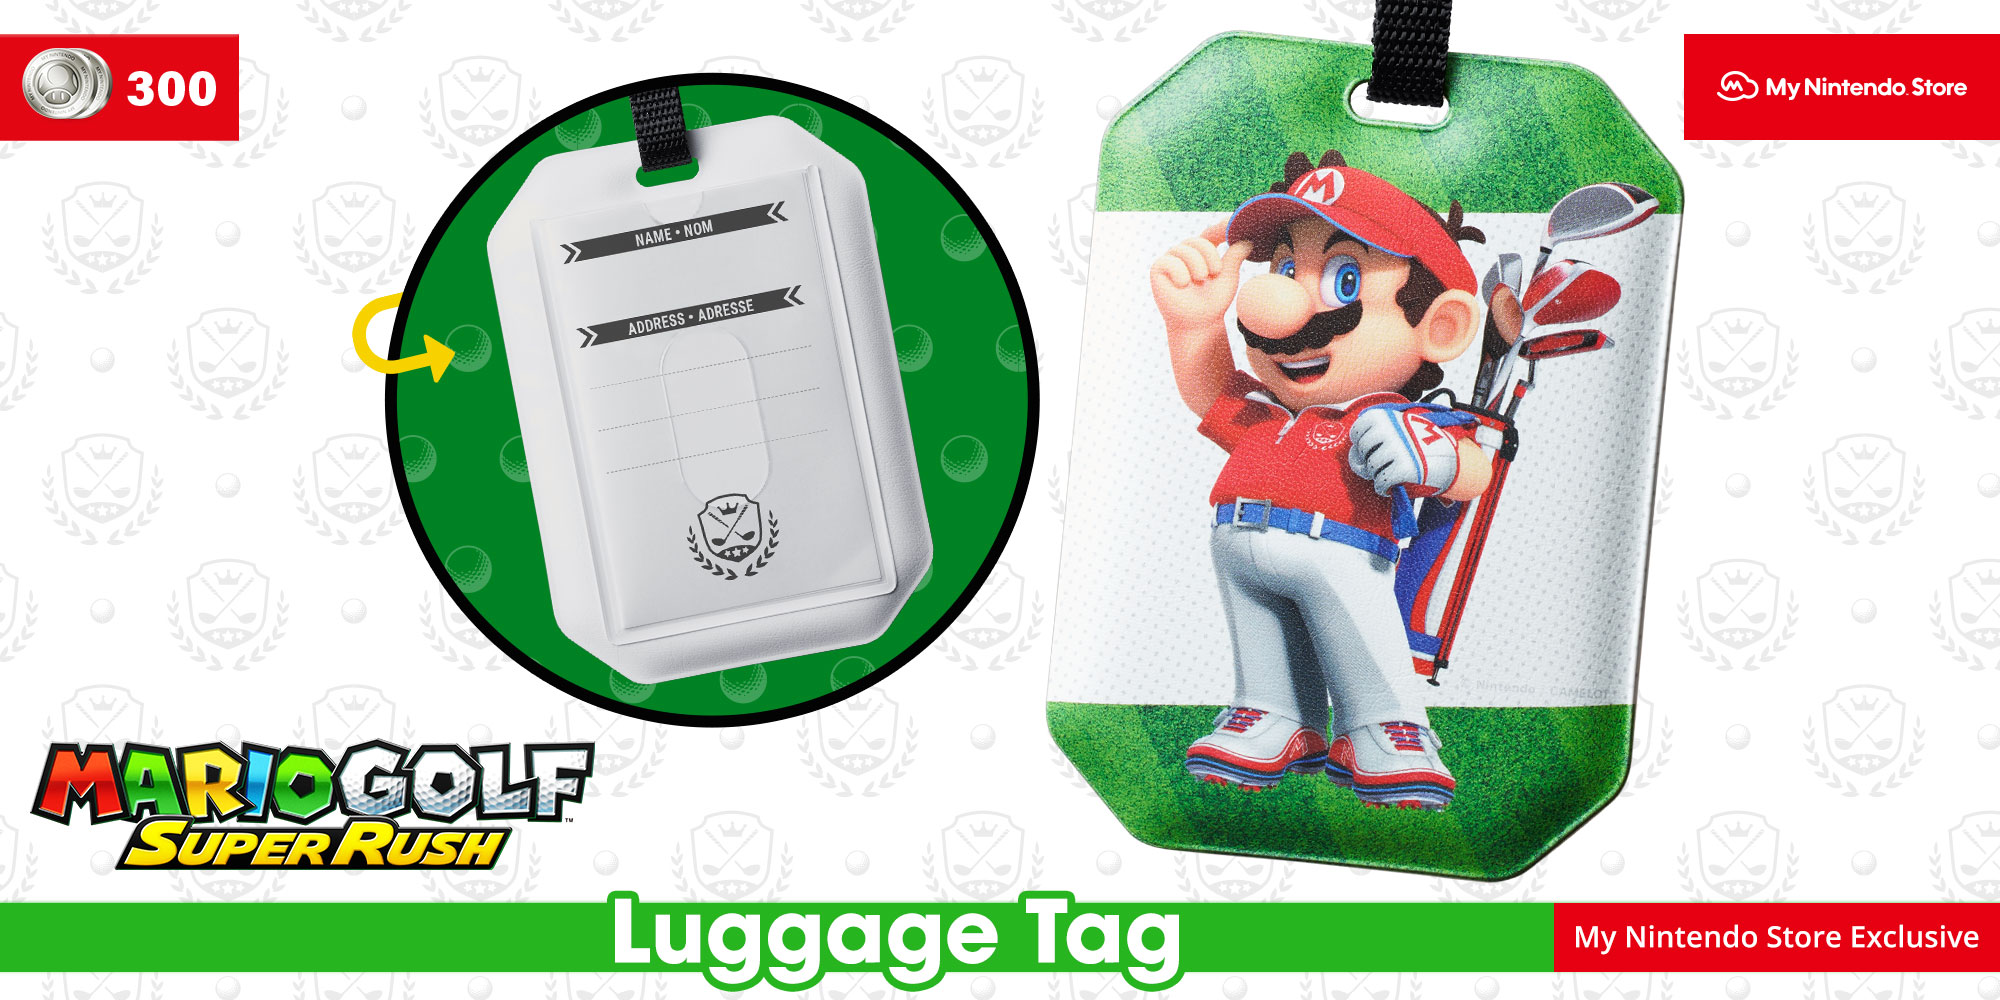 My Nintendo adds Mario Golf: Super Rush luggage tag in the UK